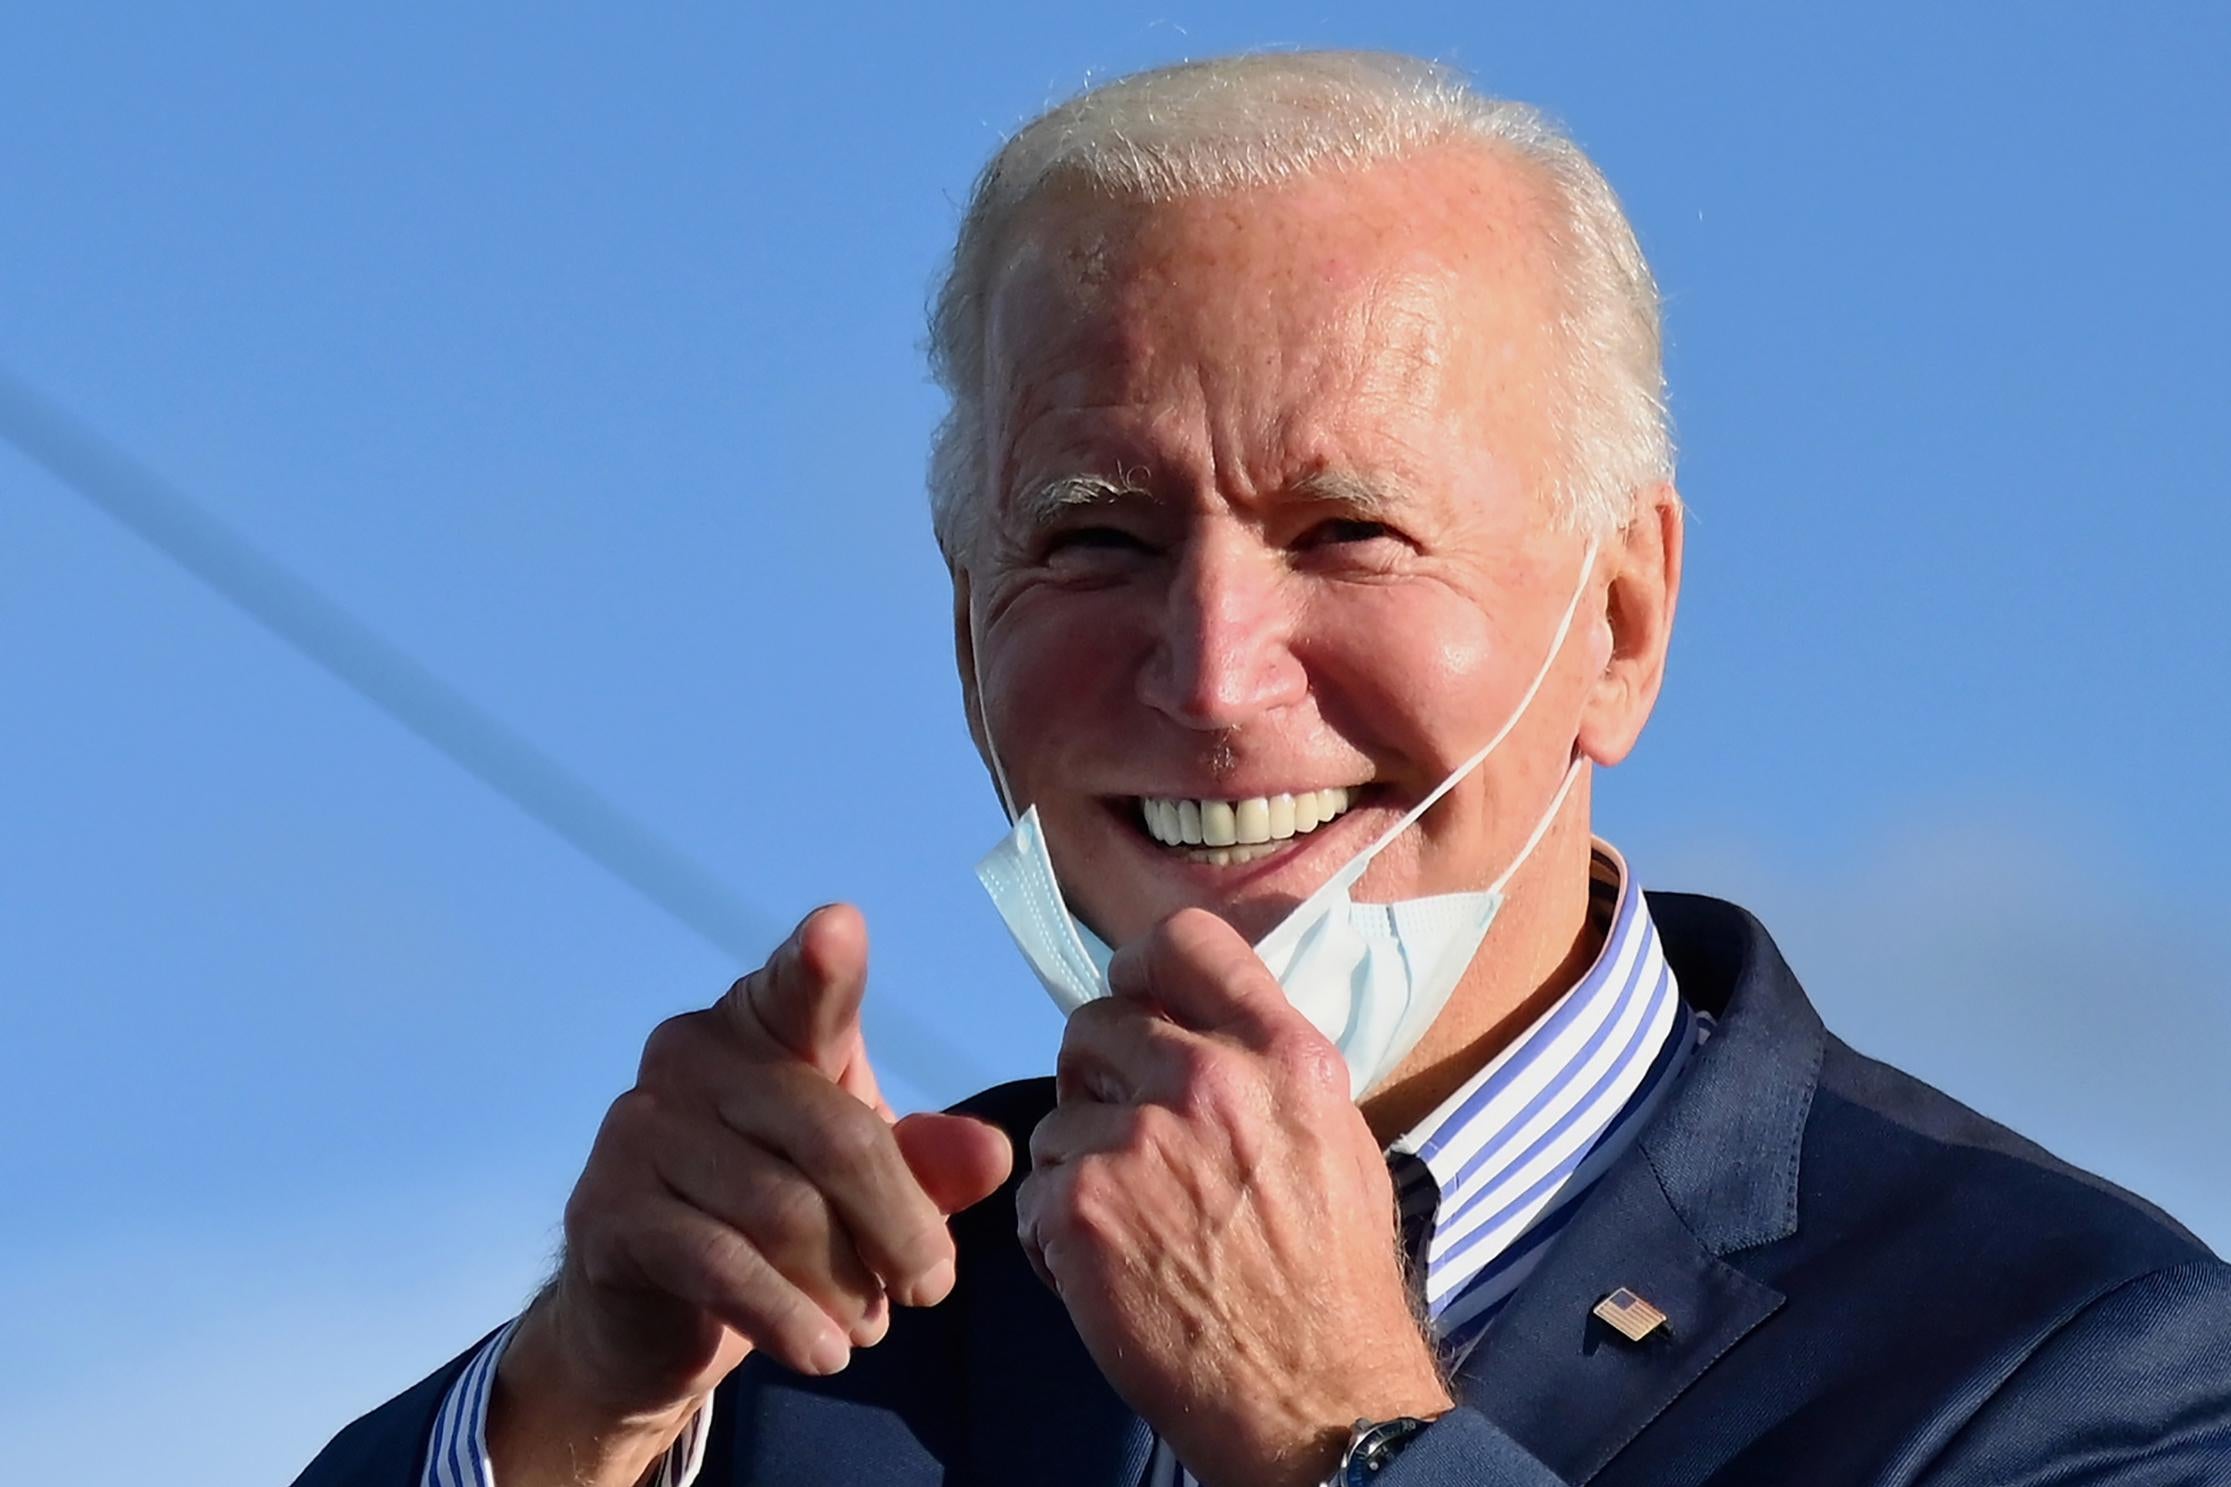 Biden grins, pulling his mask down with one hand as he points toward the camera with the other hand